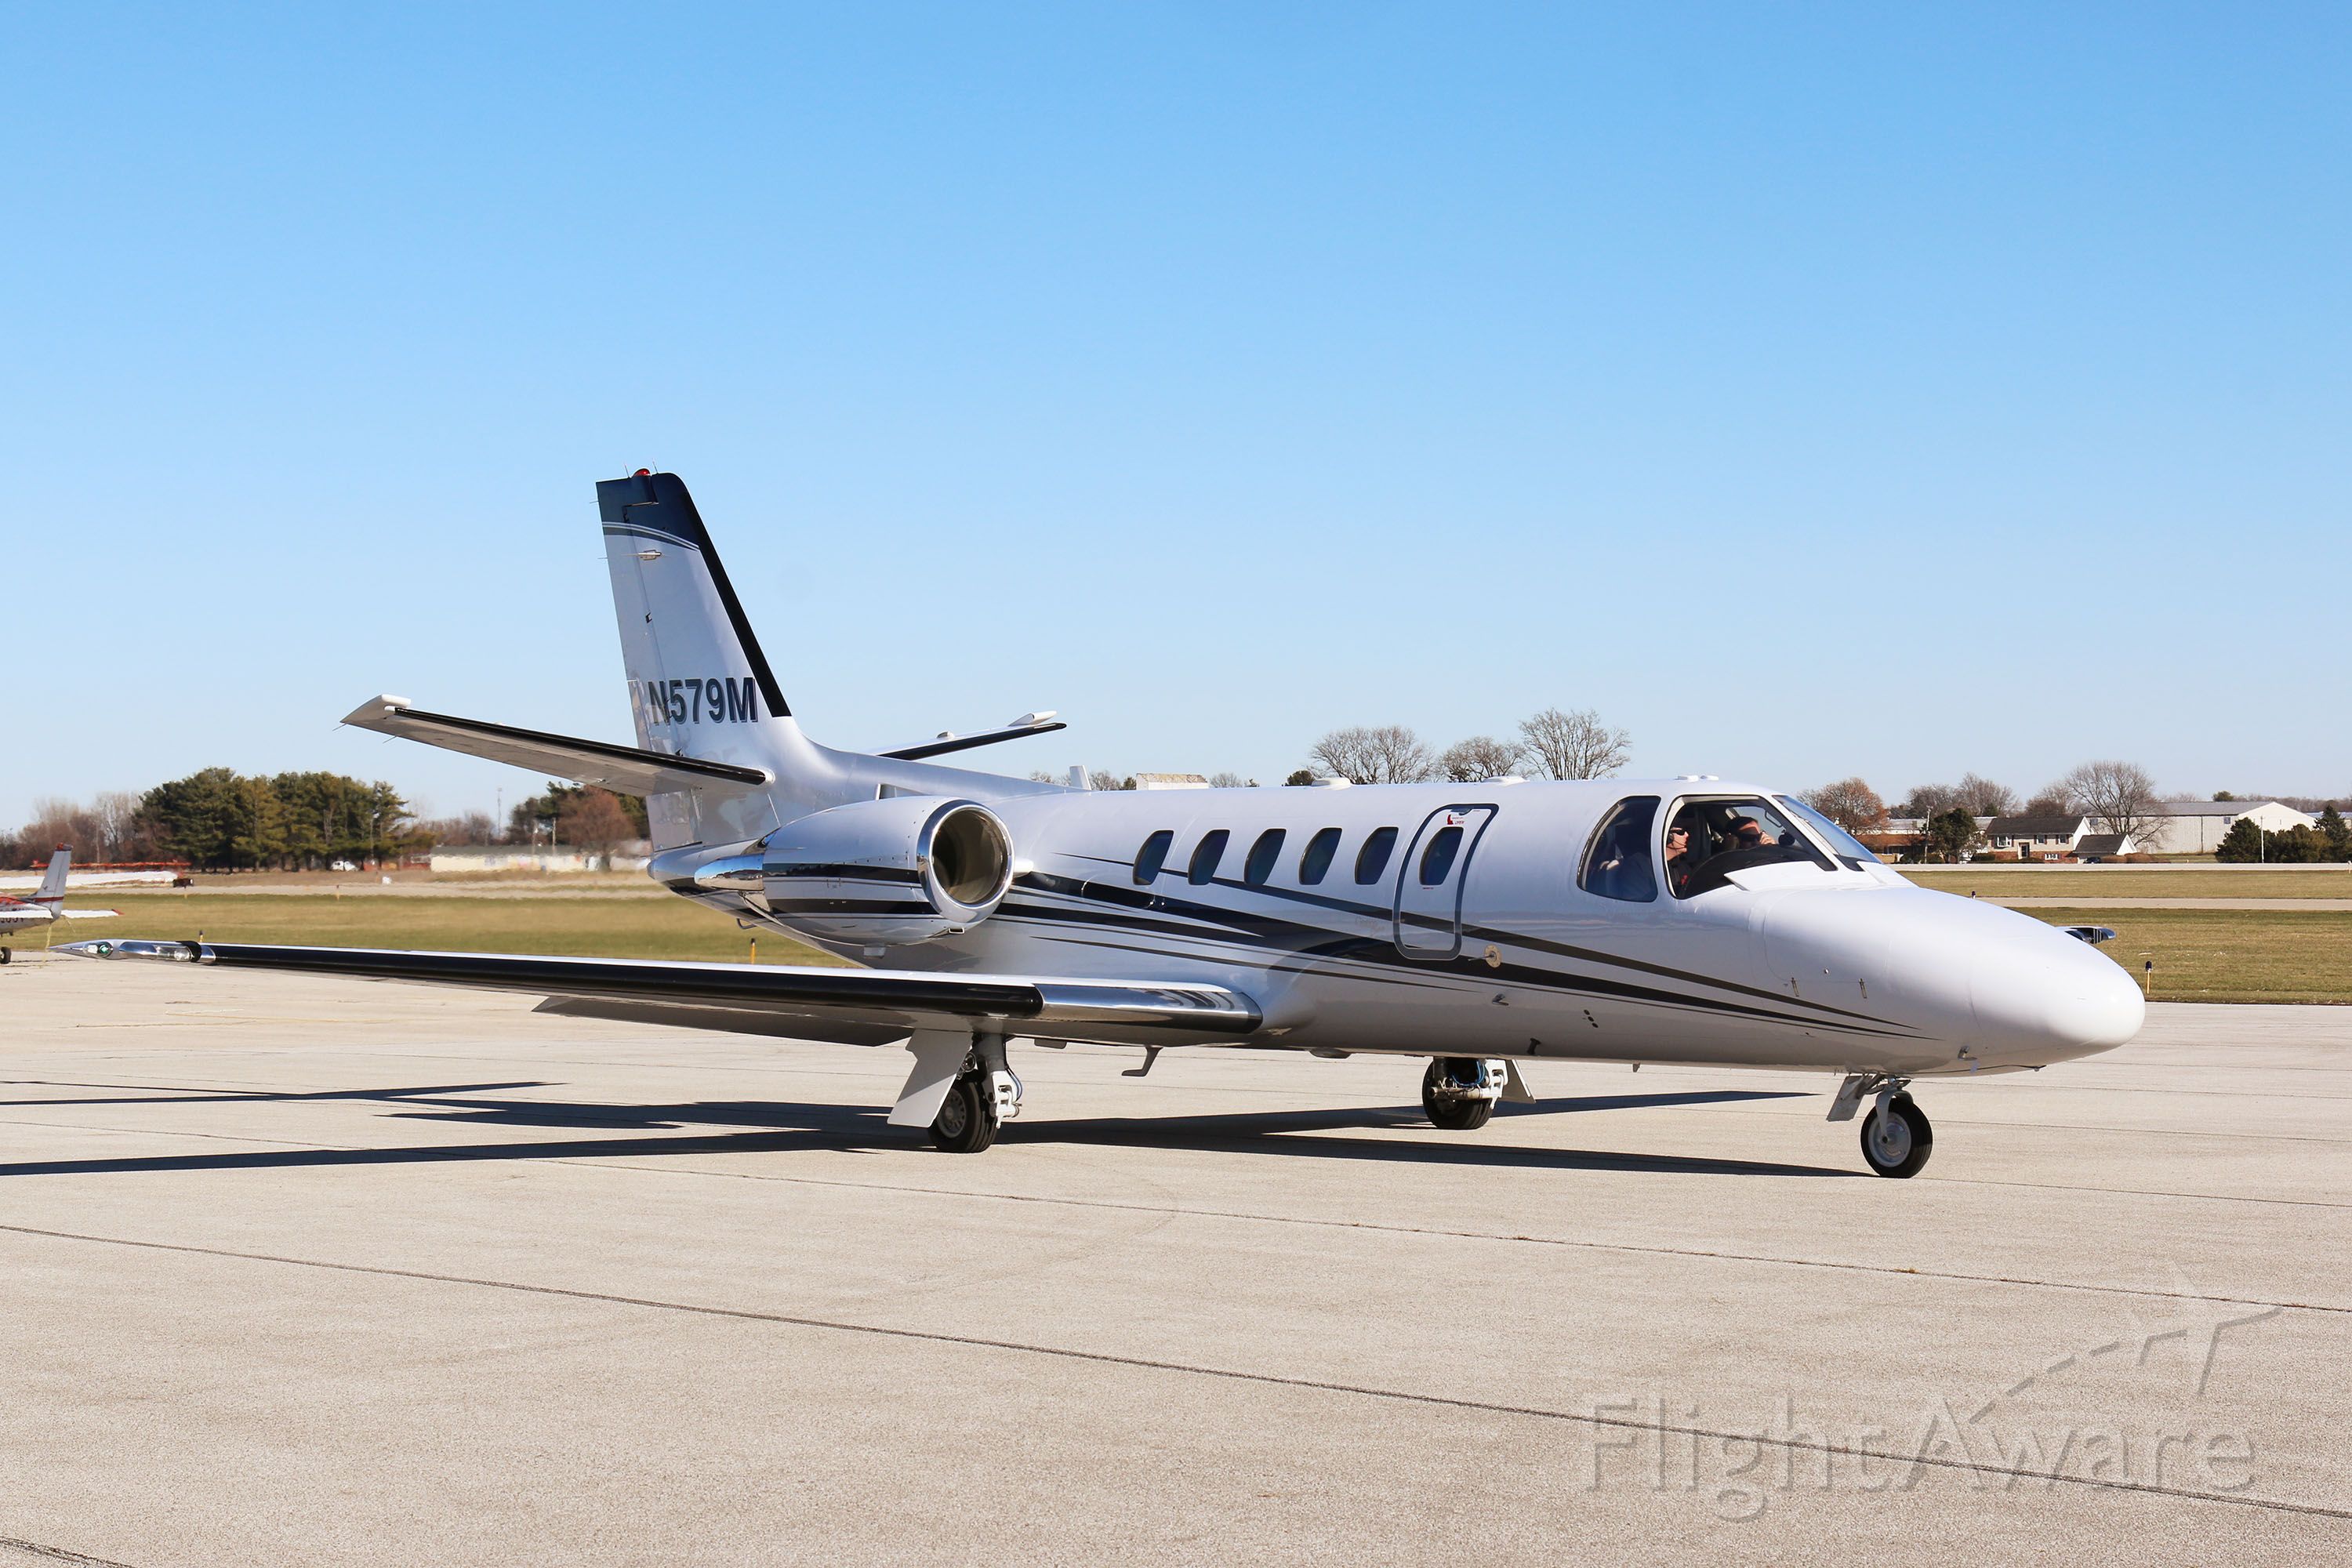 Cessna Citation II (N579M) - Come home after getting a fresh new coat of paint.